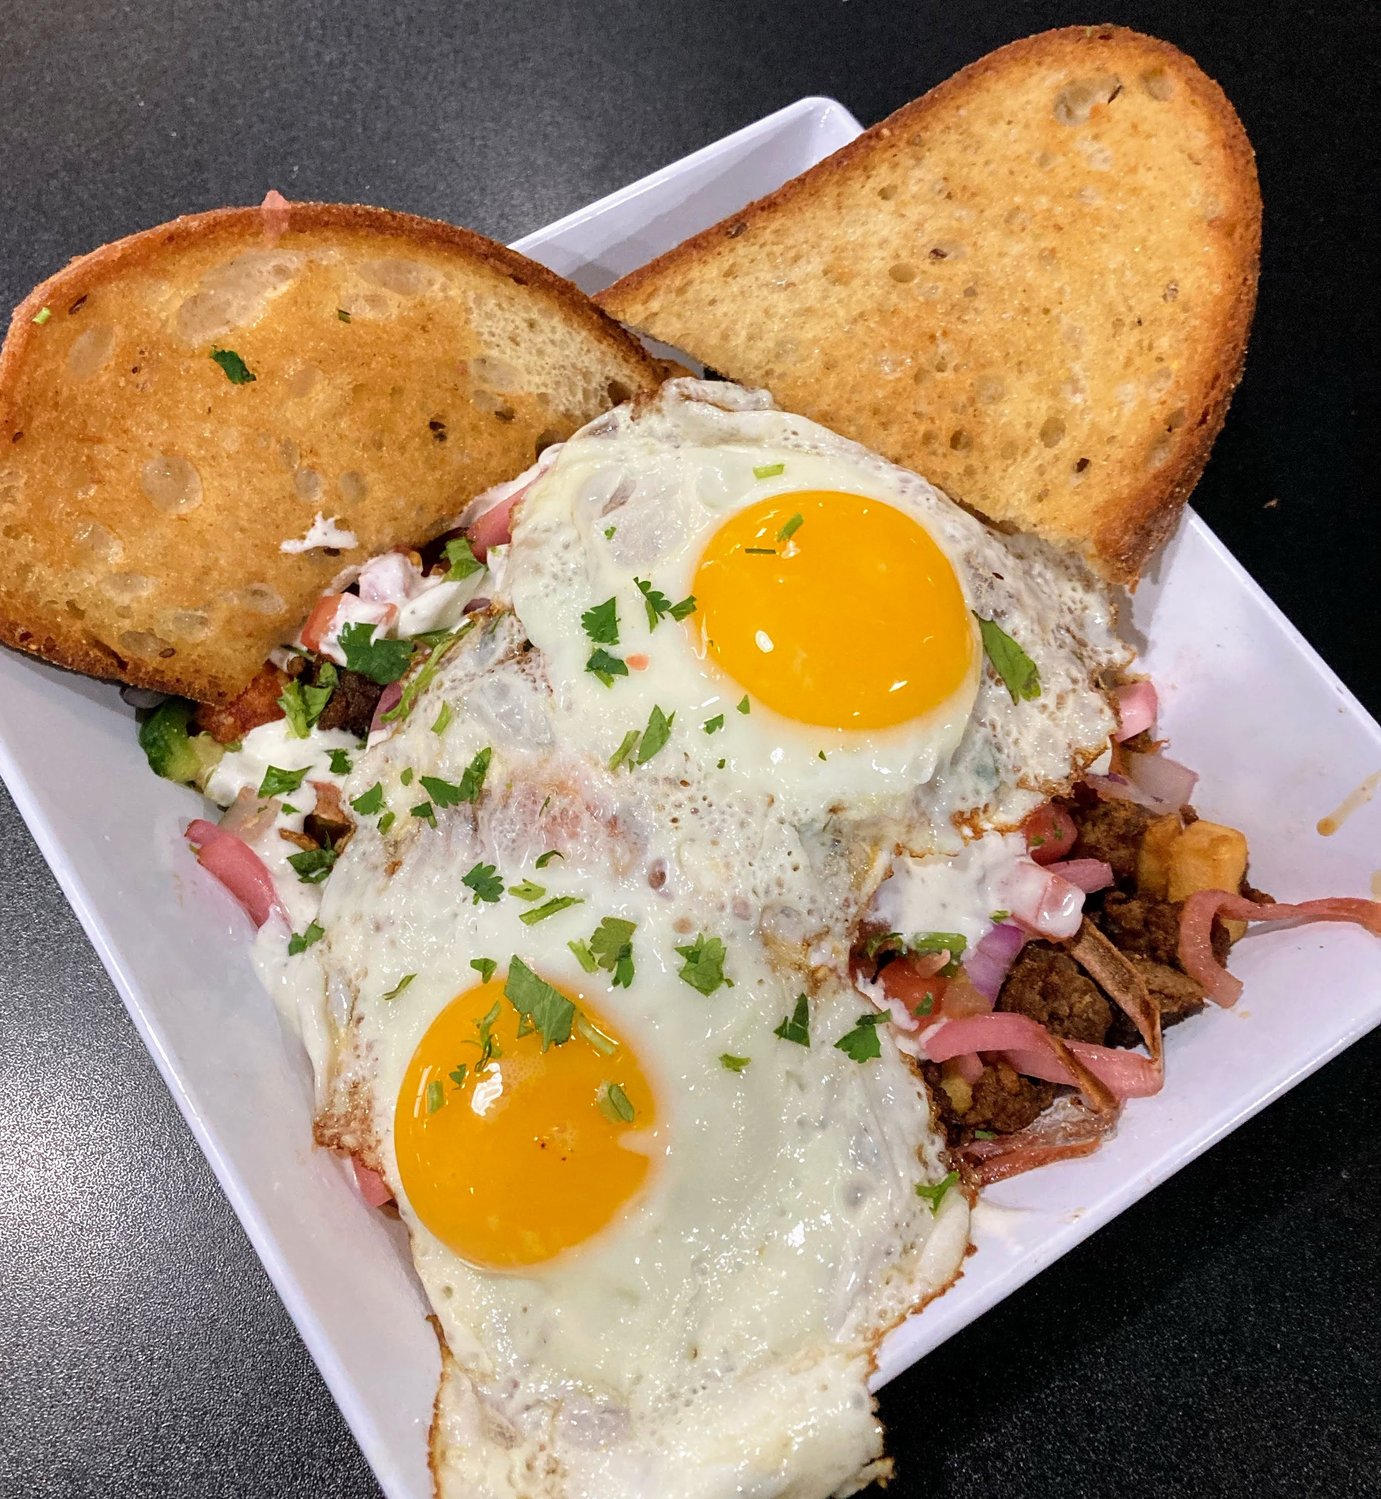 The Cabo Hash at Art’s Pub is composed of sweet potato tots, fried potatoes, fresh peppers, chorizo, queso fresco, pico de gallo, pickled red onions, lime crema and two perfectly cooked sunny-side-up eggs, plus two pieces of toast to assemble a messy, mouthwatering sandwich.